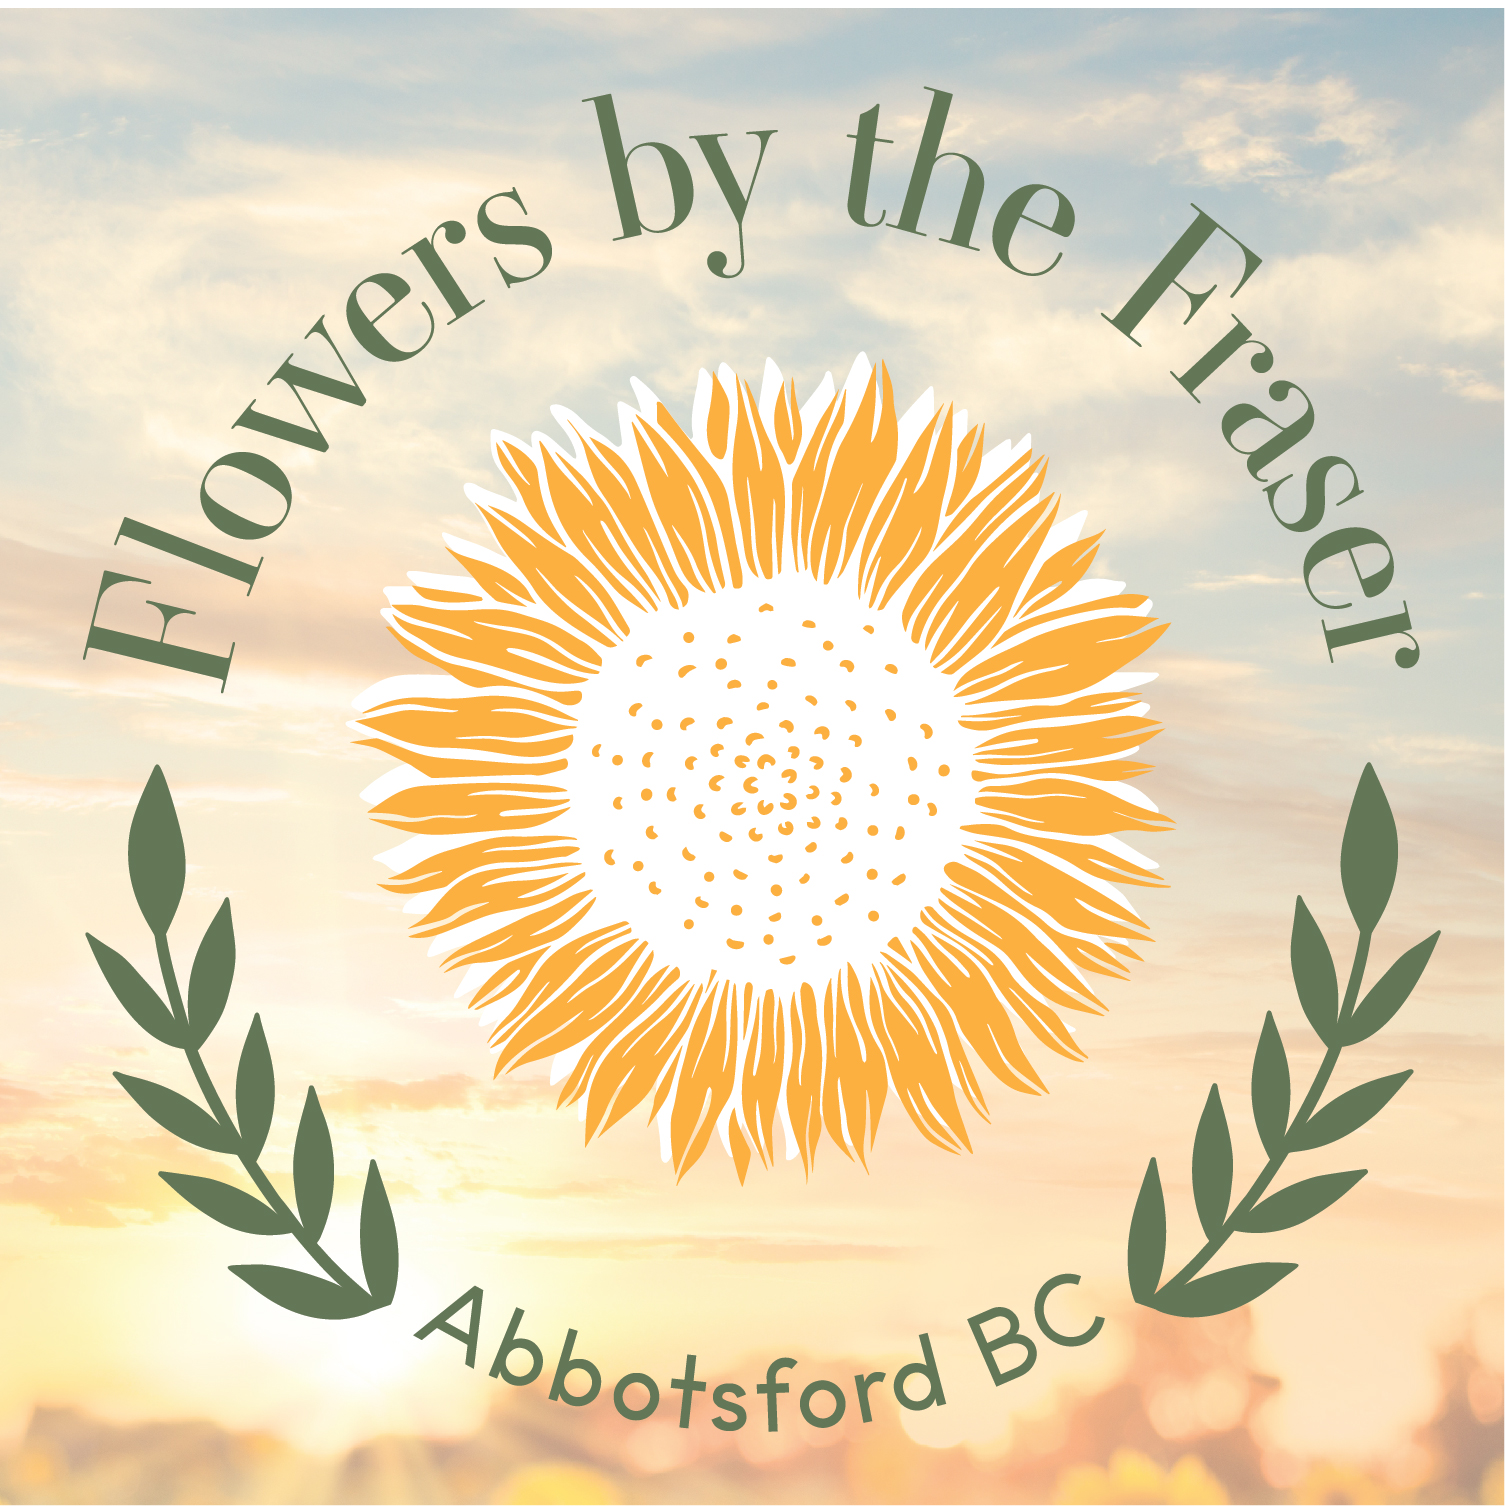 FLOWERS BY THE FRASER by bl3nd design graphic design agency in abbotsford british columbia canada